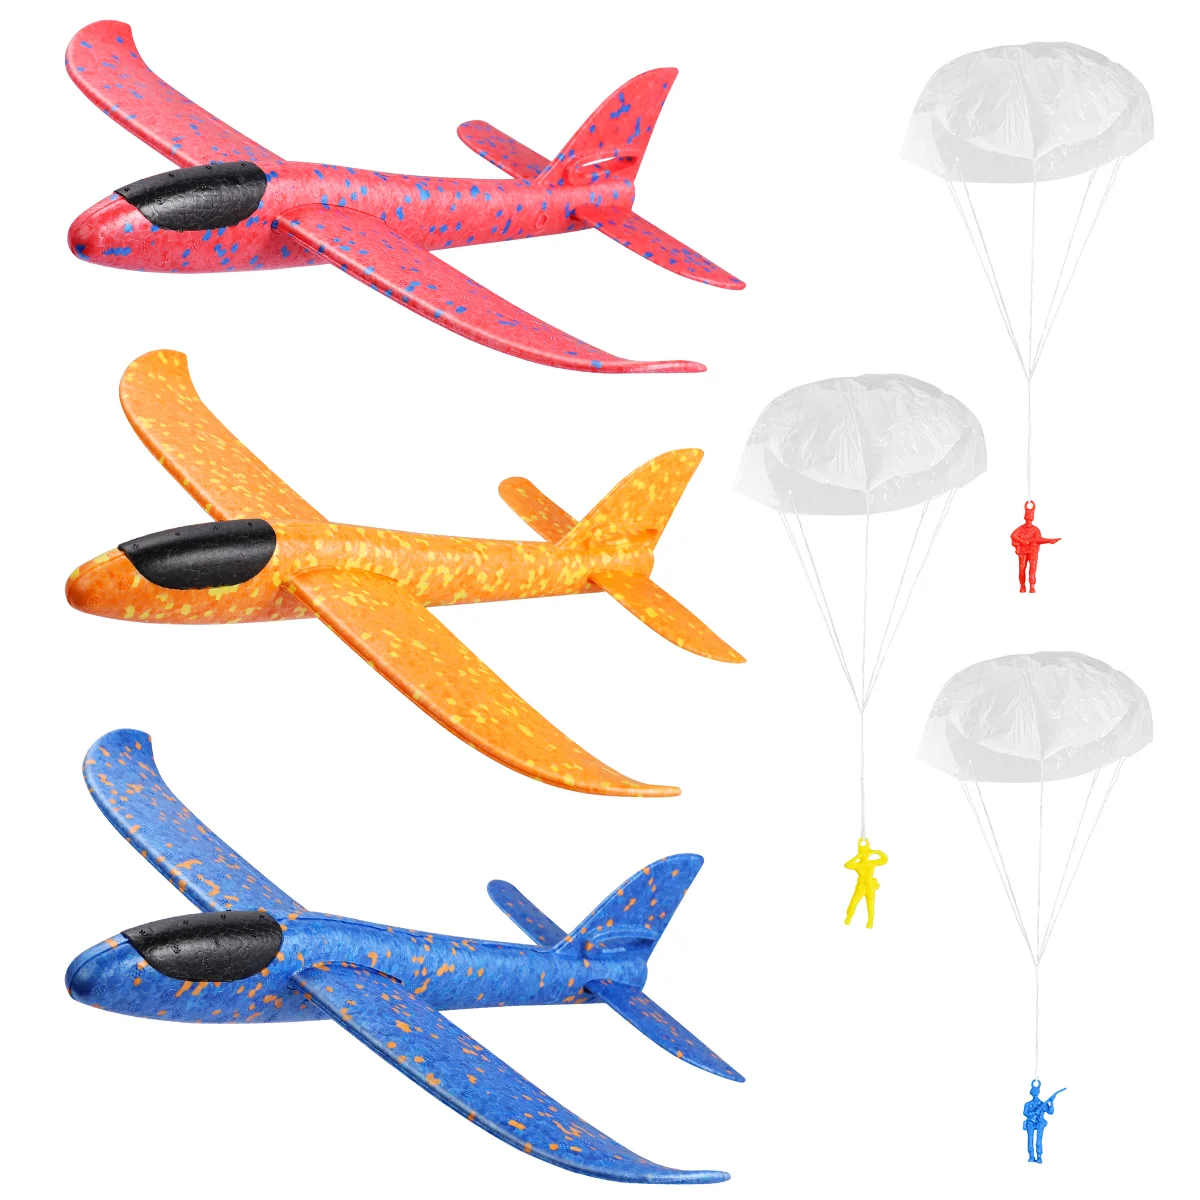 

3PCS Glider Airplane, 144 inch Throwing Glider Planes Flying Glider Airplane Toys with 3pcs Parachute for Outdoor Playing